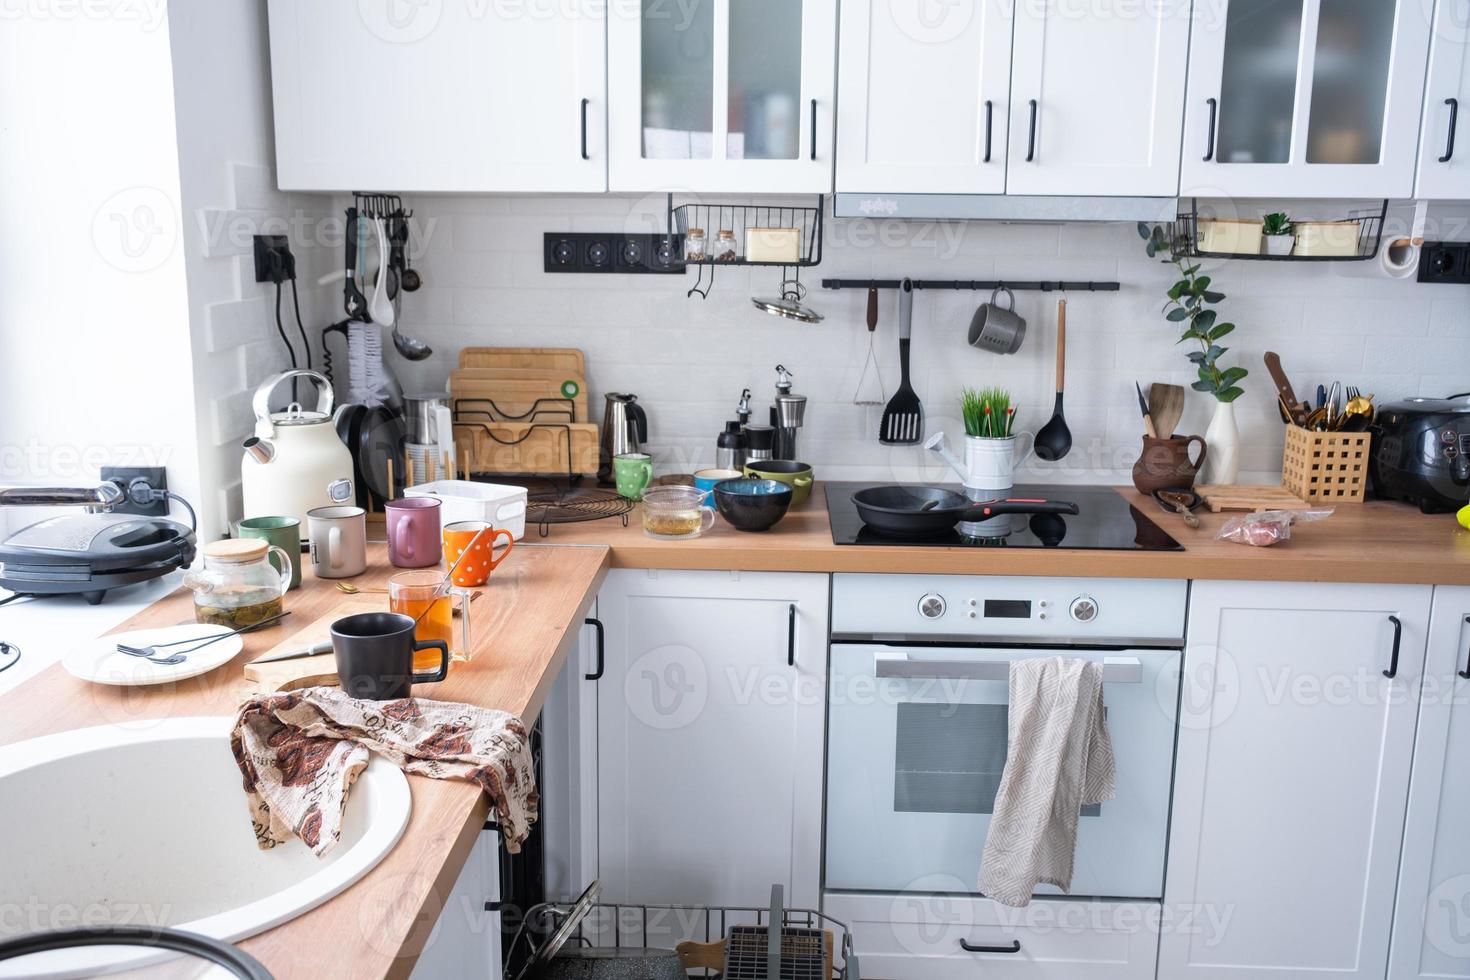 https://static.vecteezy.com/system/resources/previews/021/886/490/non_2x/a-mess-in-the-kitchen-dirty-dishes-on-the-table-scattered-things-unsanitary-conditions-the-dishwasher-is-full-the-kitchen-is-untidy-everyday-life-photo.jpg